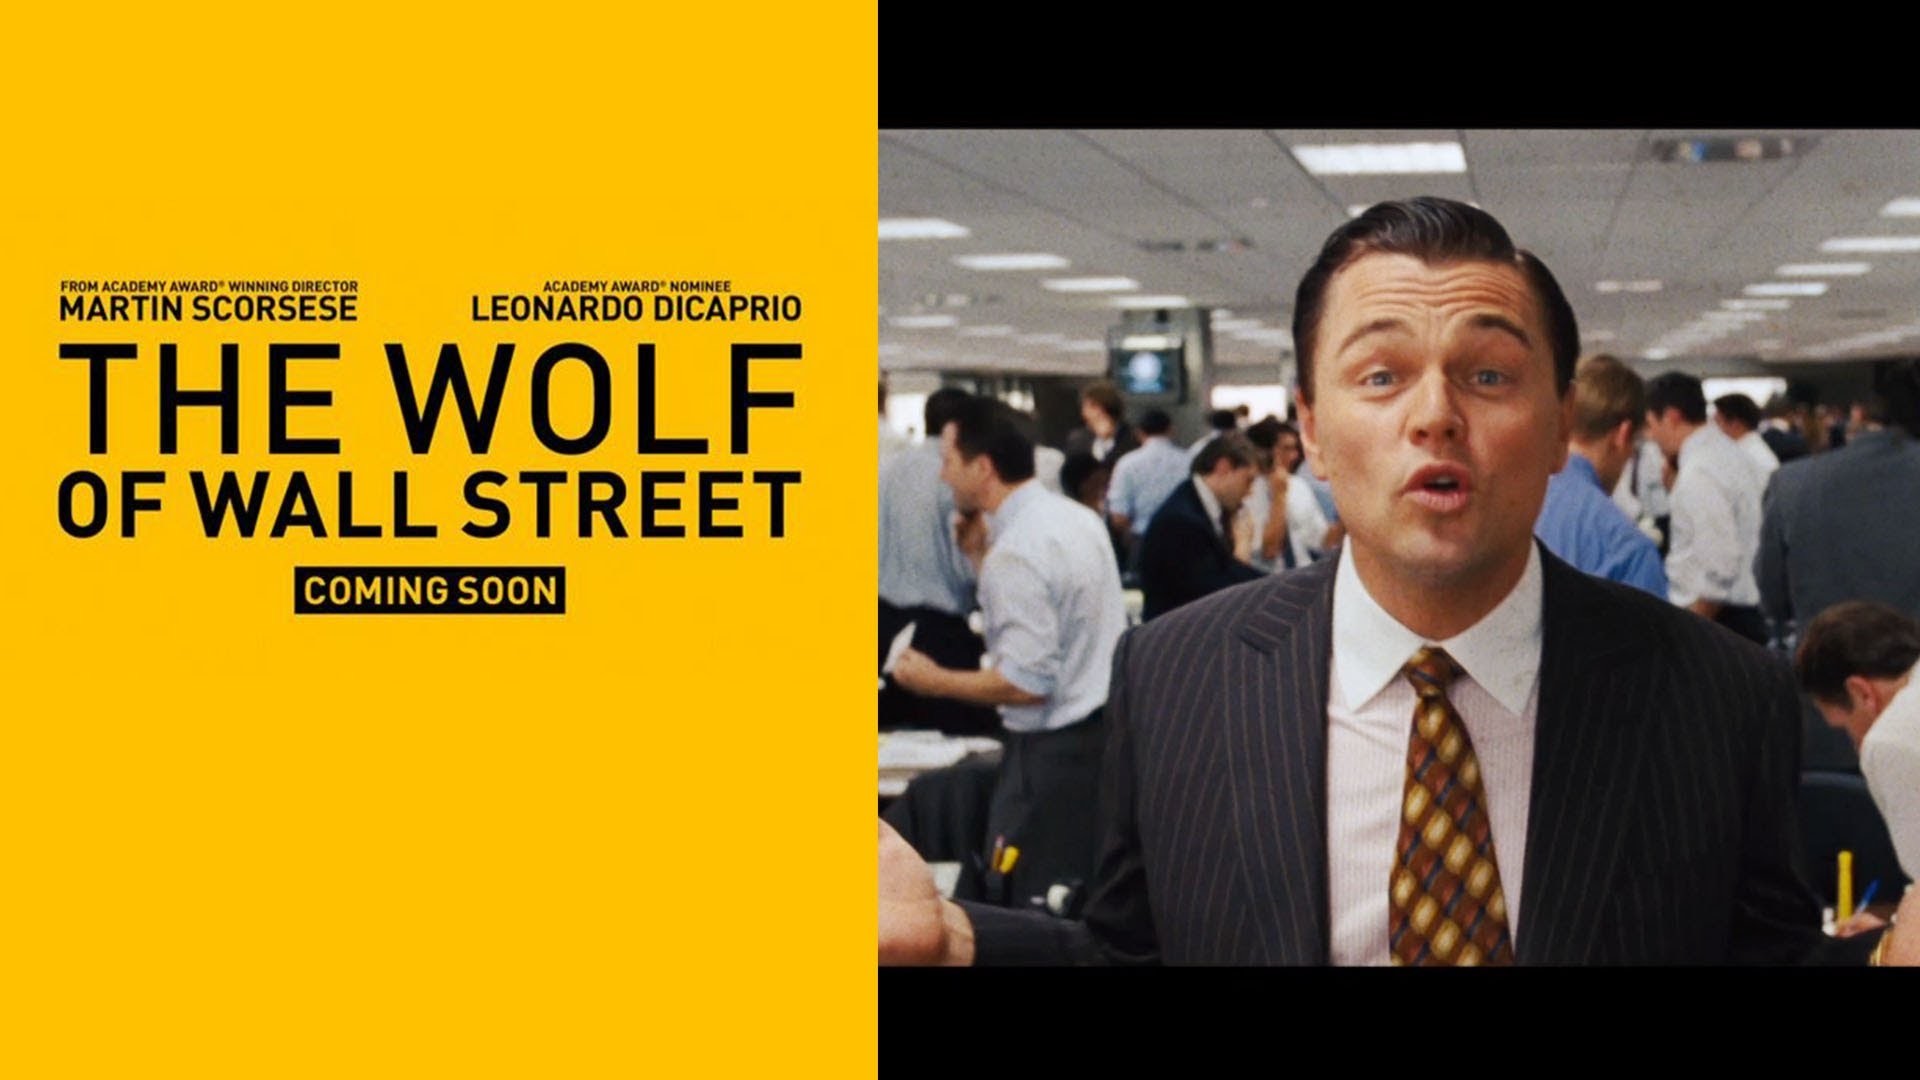 Latest Collection Of The Wolf Of Wall Street Wallpapers, - Leonardo Dicaprio Wolf Of Wall Street Awards - HD Wallpaper 